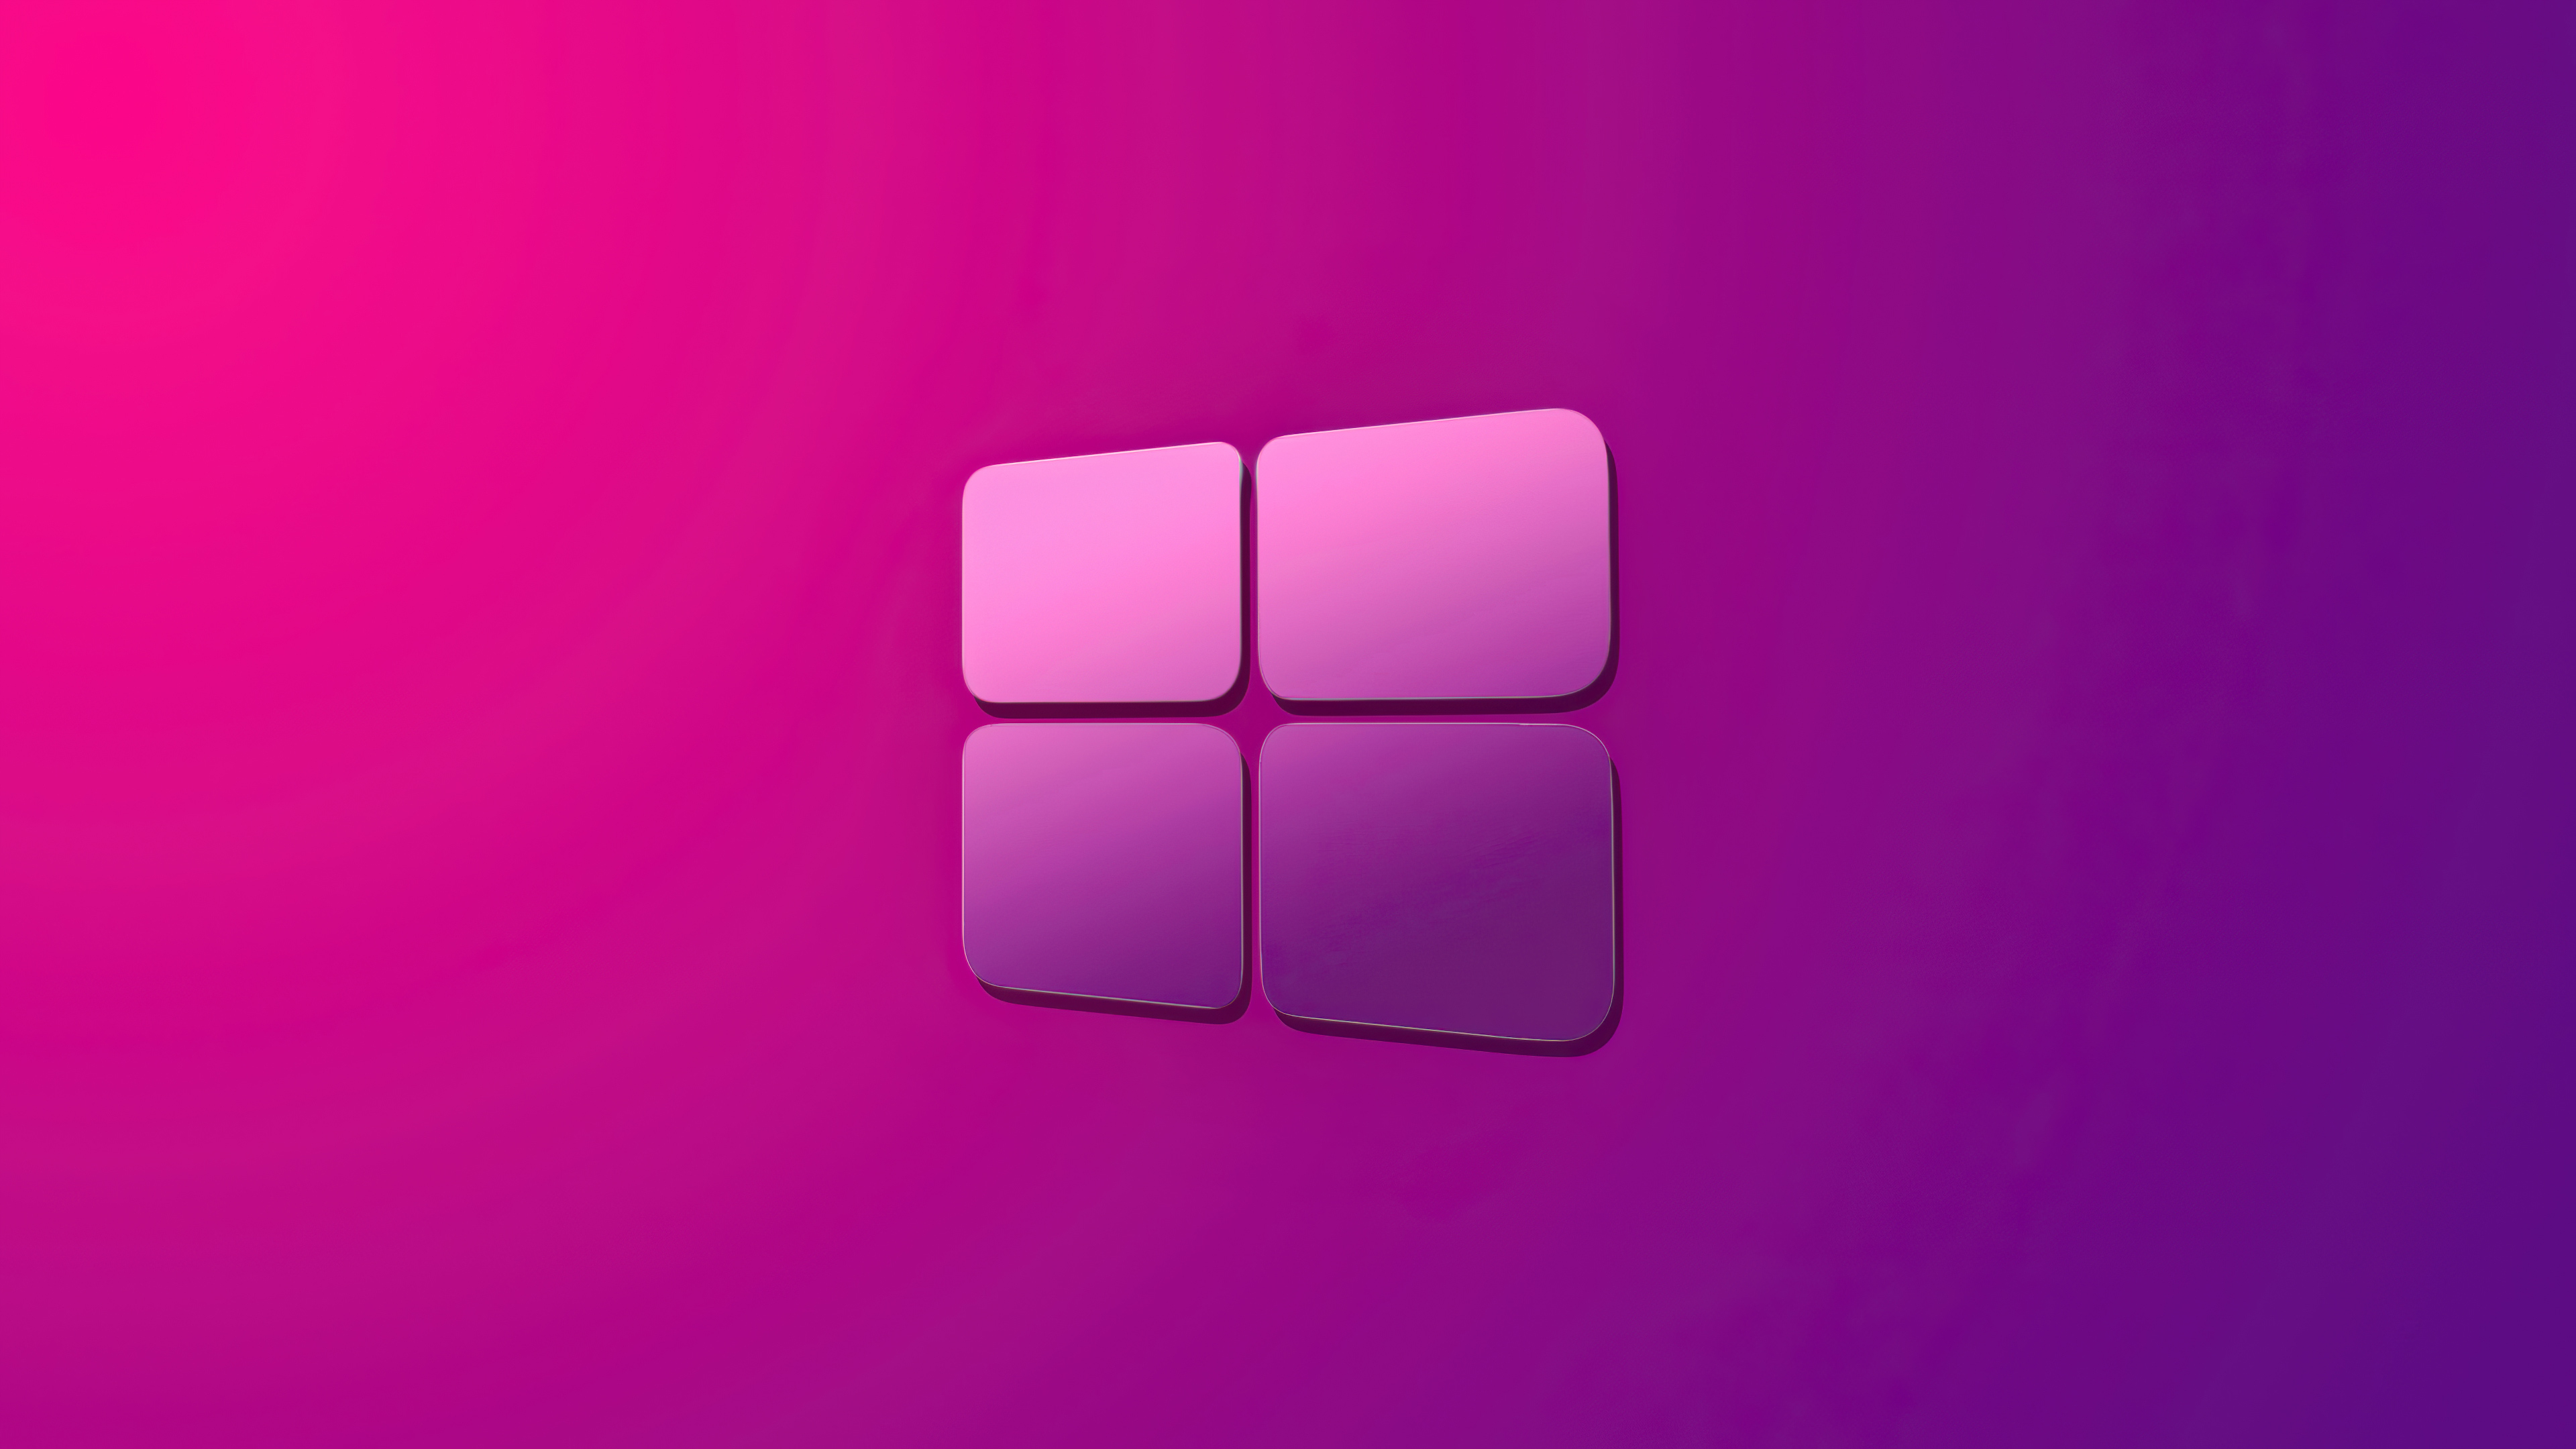 3840x2160 1366x768 Windows 10 Pink Purple Gradient Logo 4k 1366x768 Resolution HD 4k Wallpapers, Images, Backgrounds, Photos and Pictures